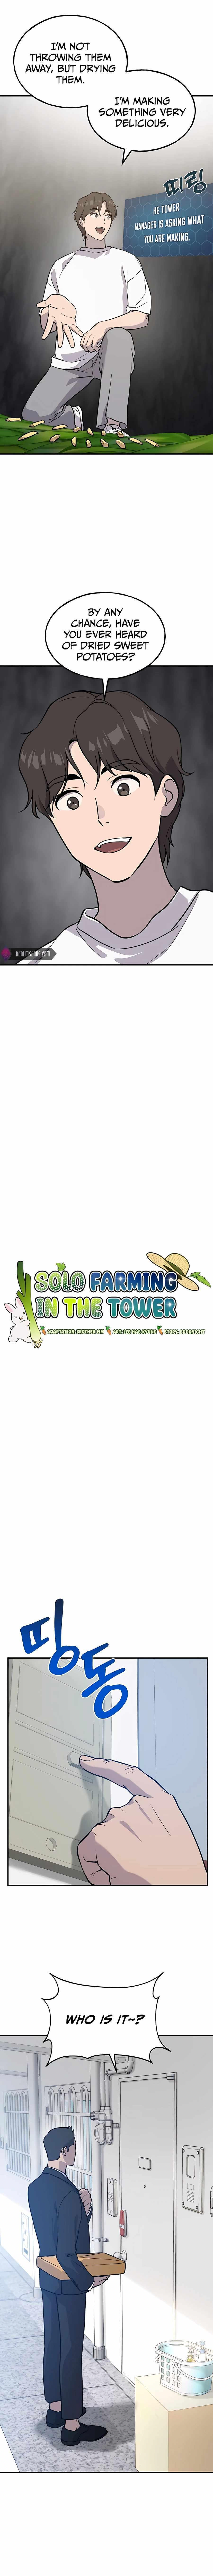 Solo Farming In The Tower chapter 21